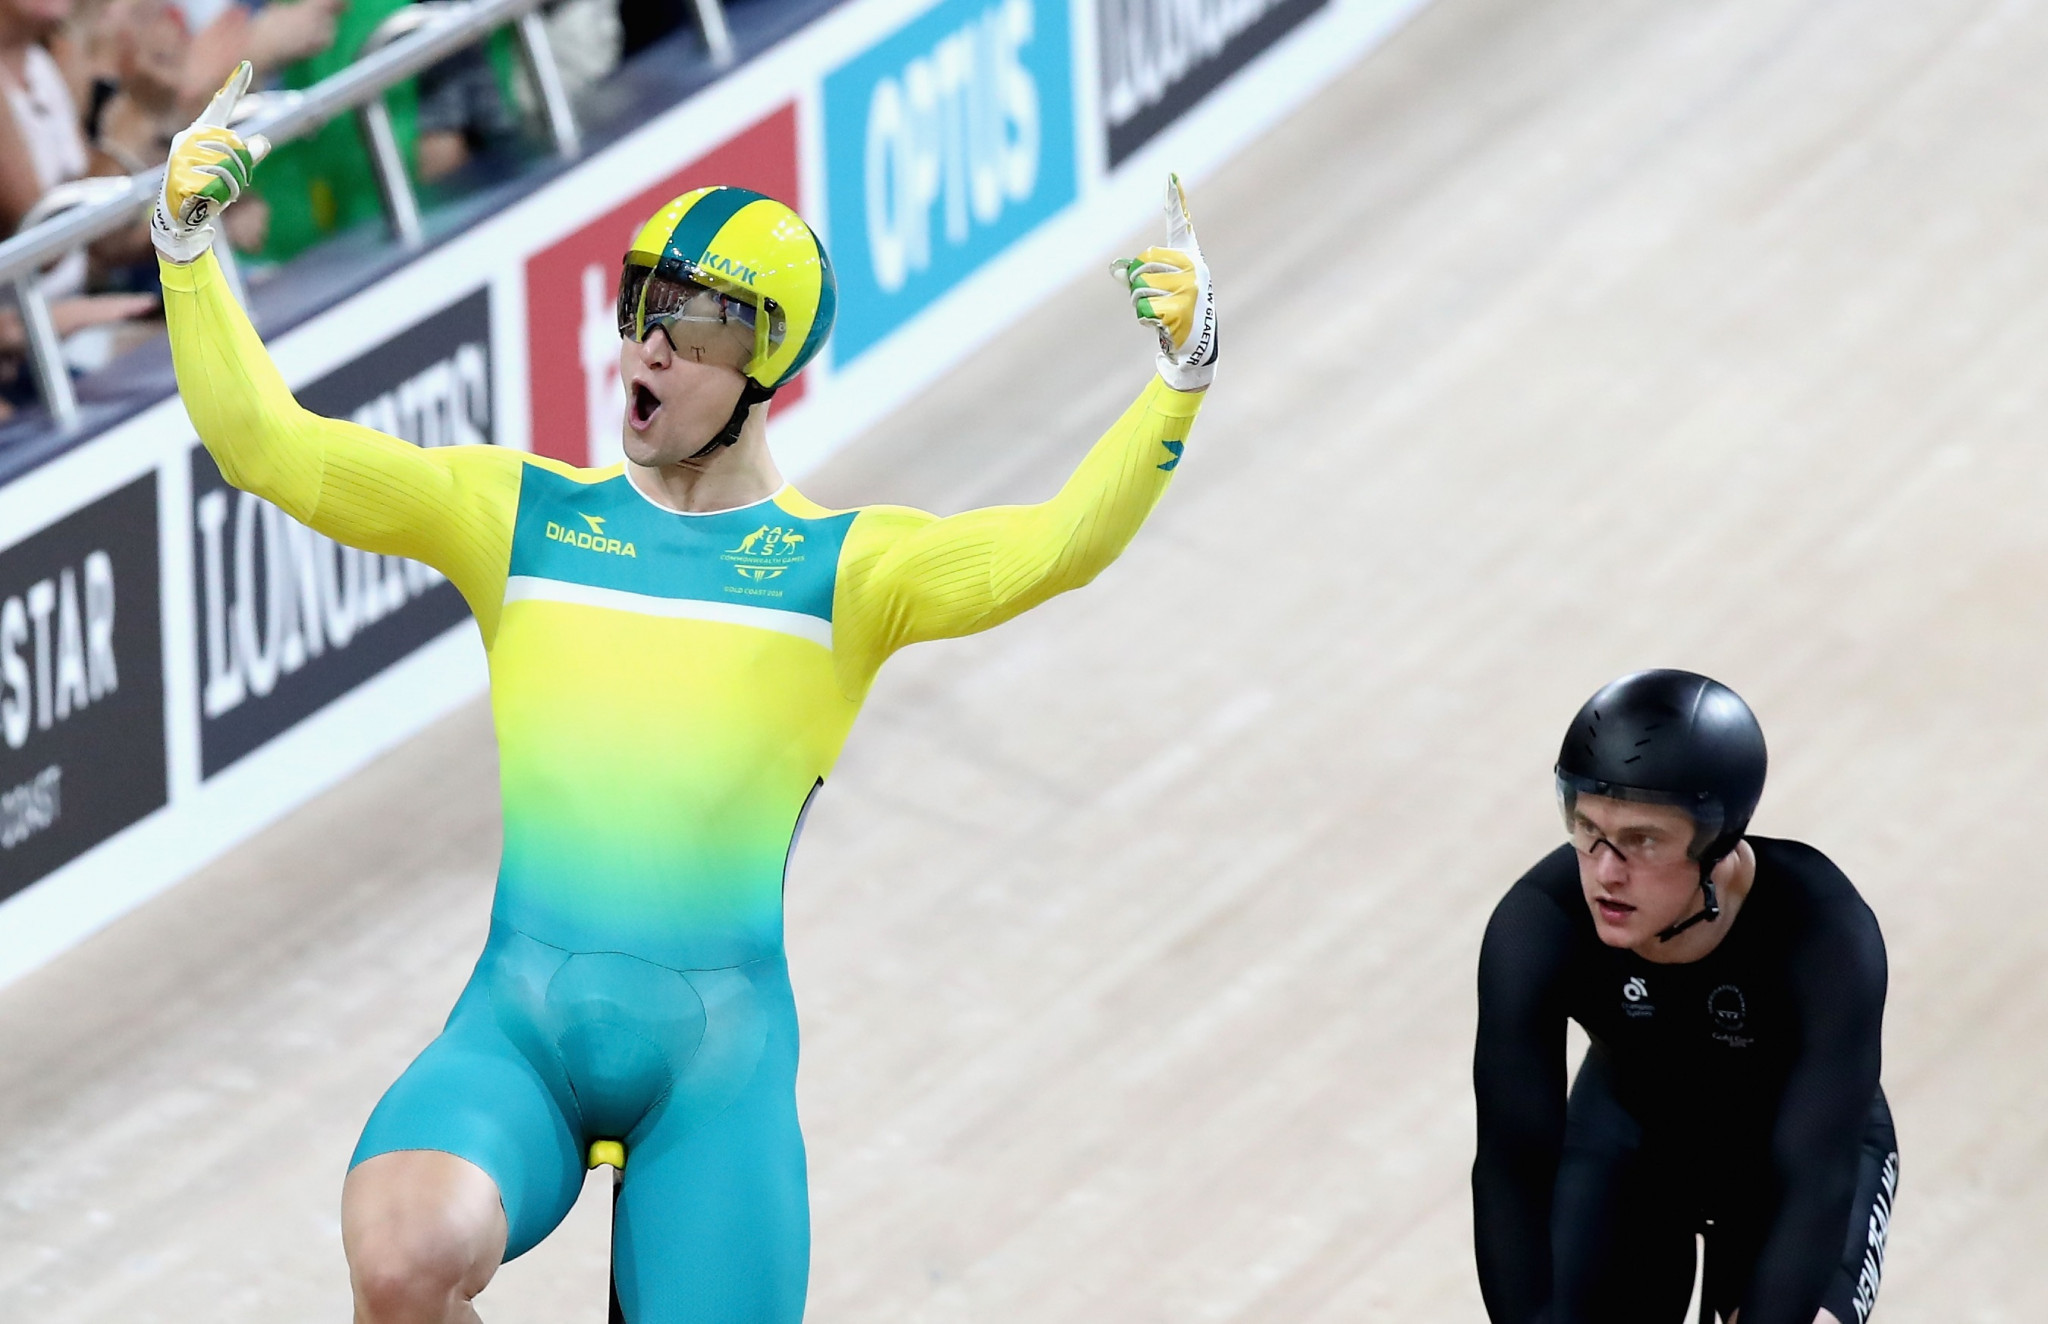 Matt Glaetzer was one of two gold medallists for Australia in track cycling, winning the men's keirin event ©Getty Images